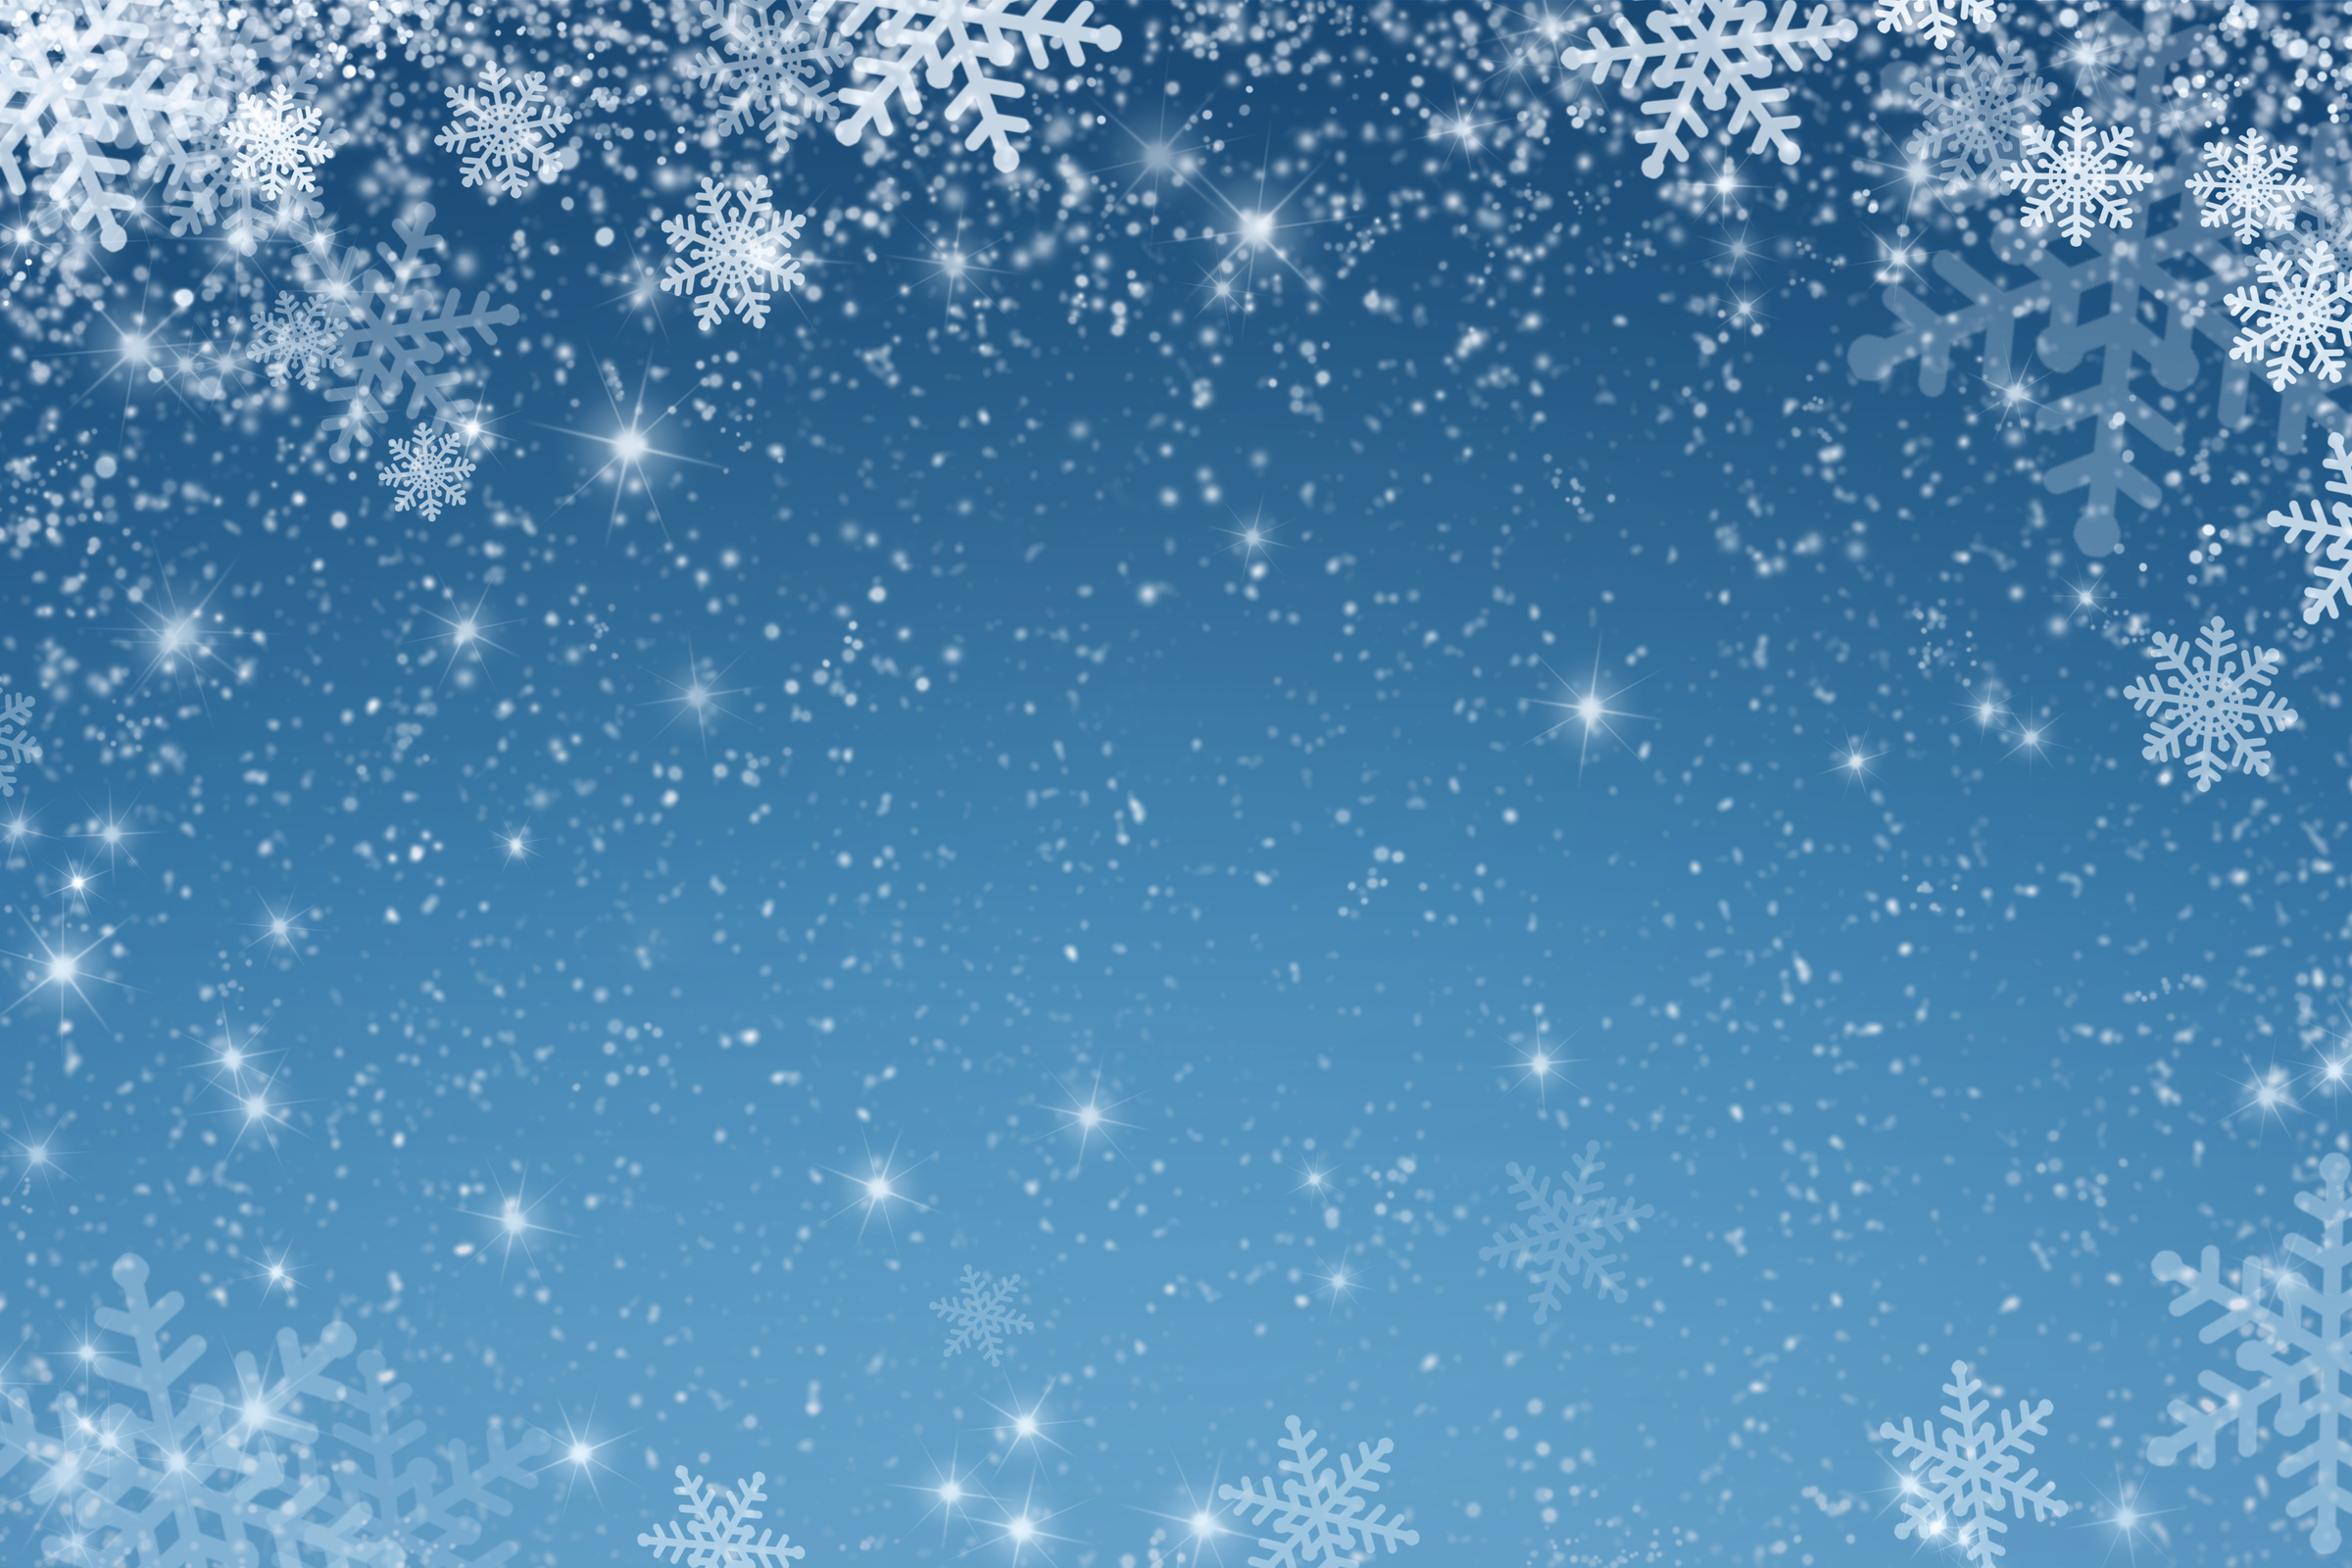 Christmas Art Abstract Background on Blue.